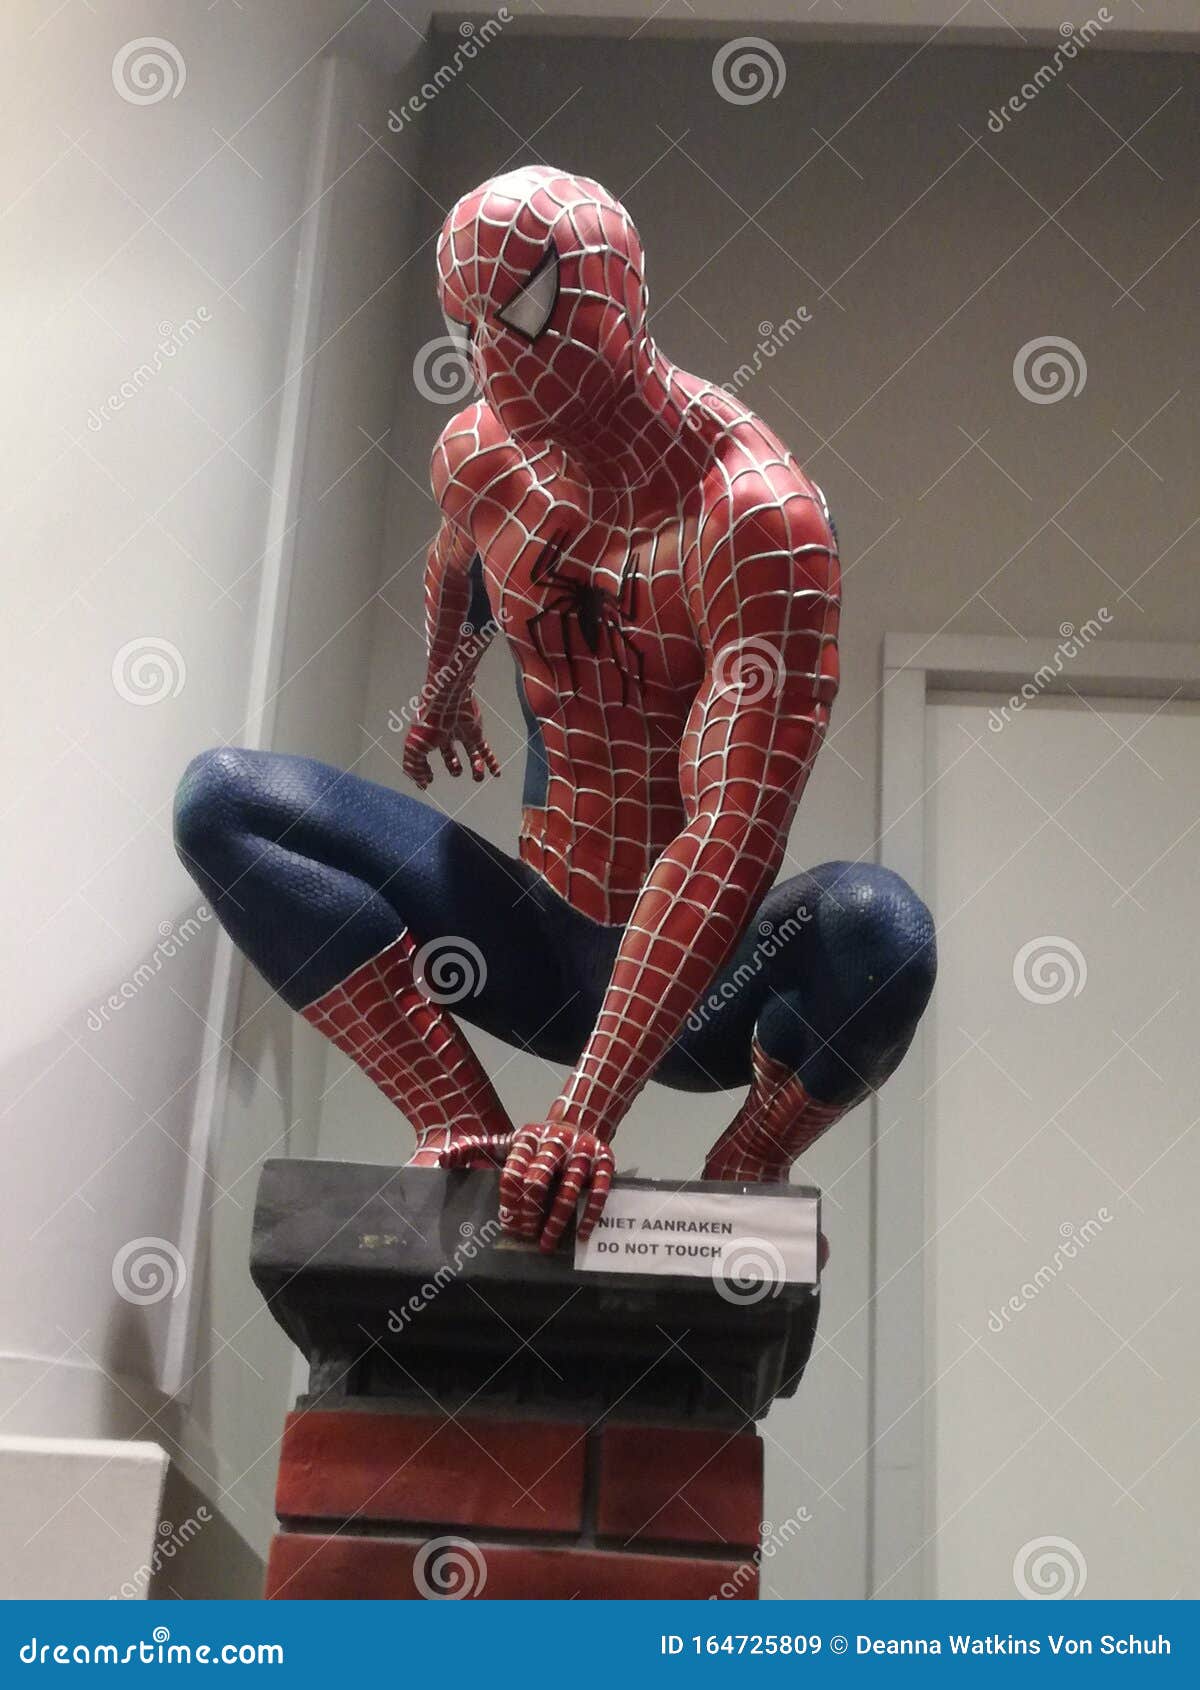 Spiderman statue editorial stock image. Image of marvel - 164725809